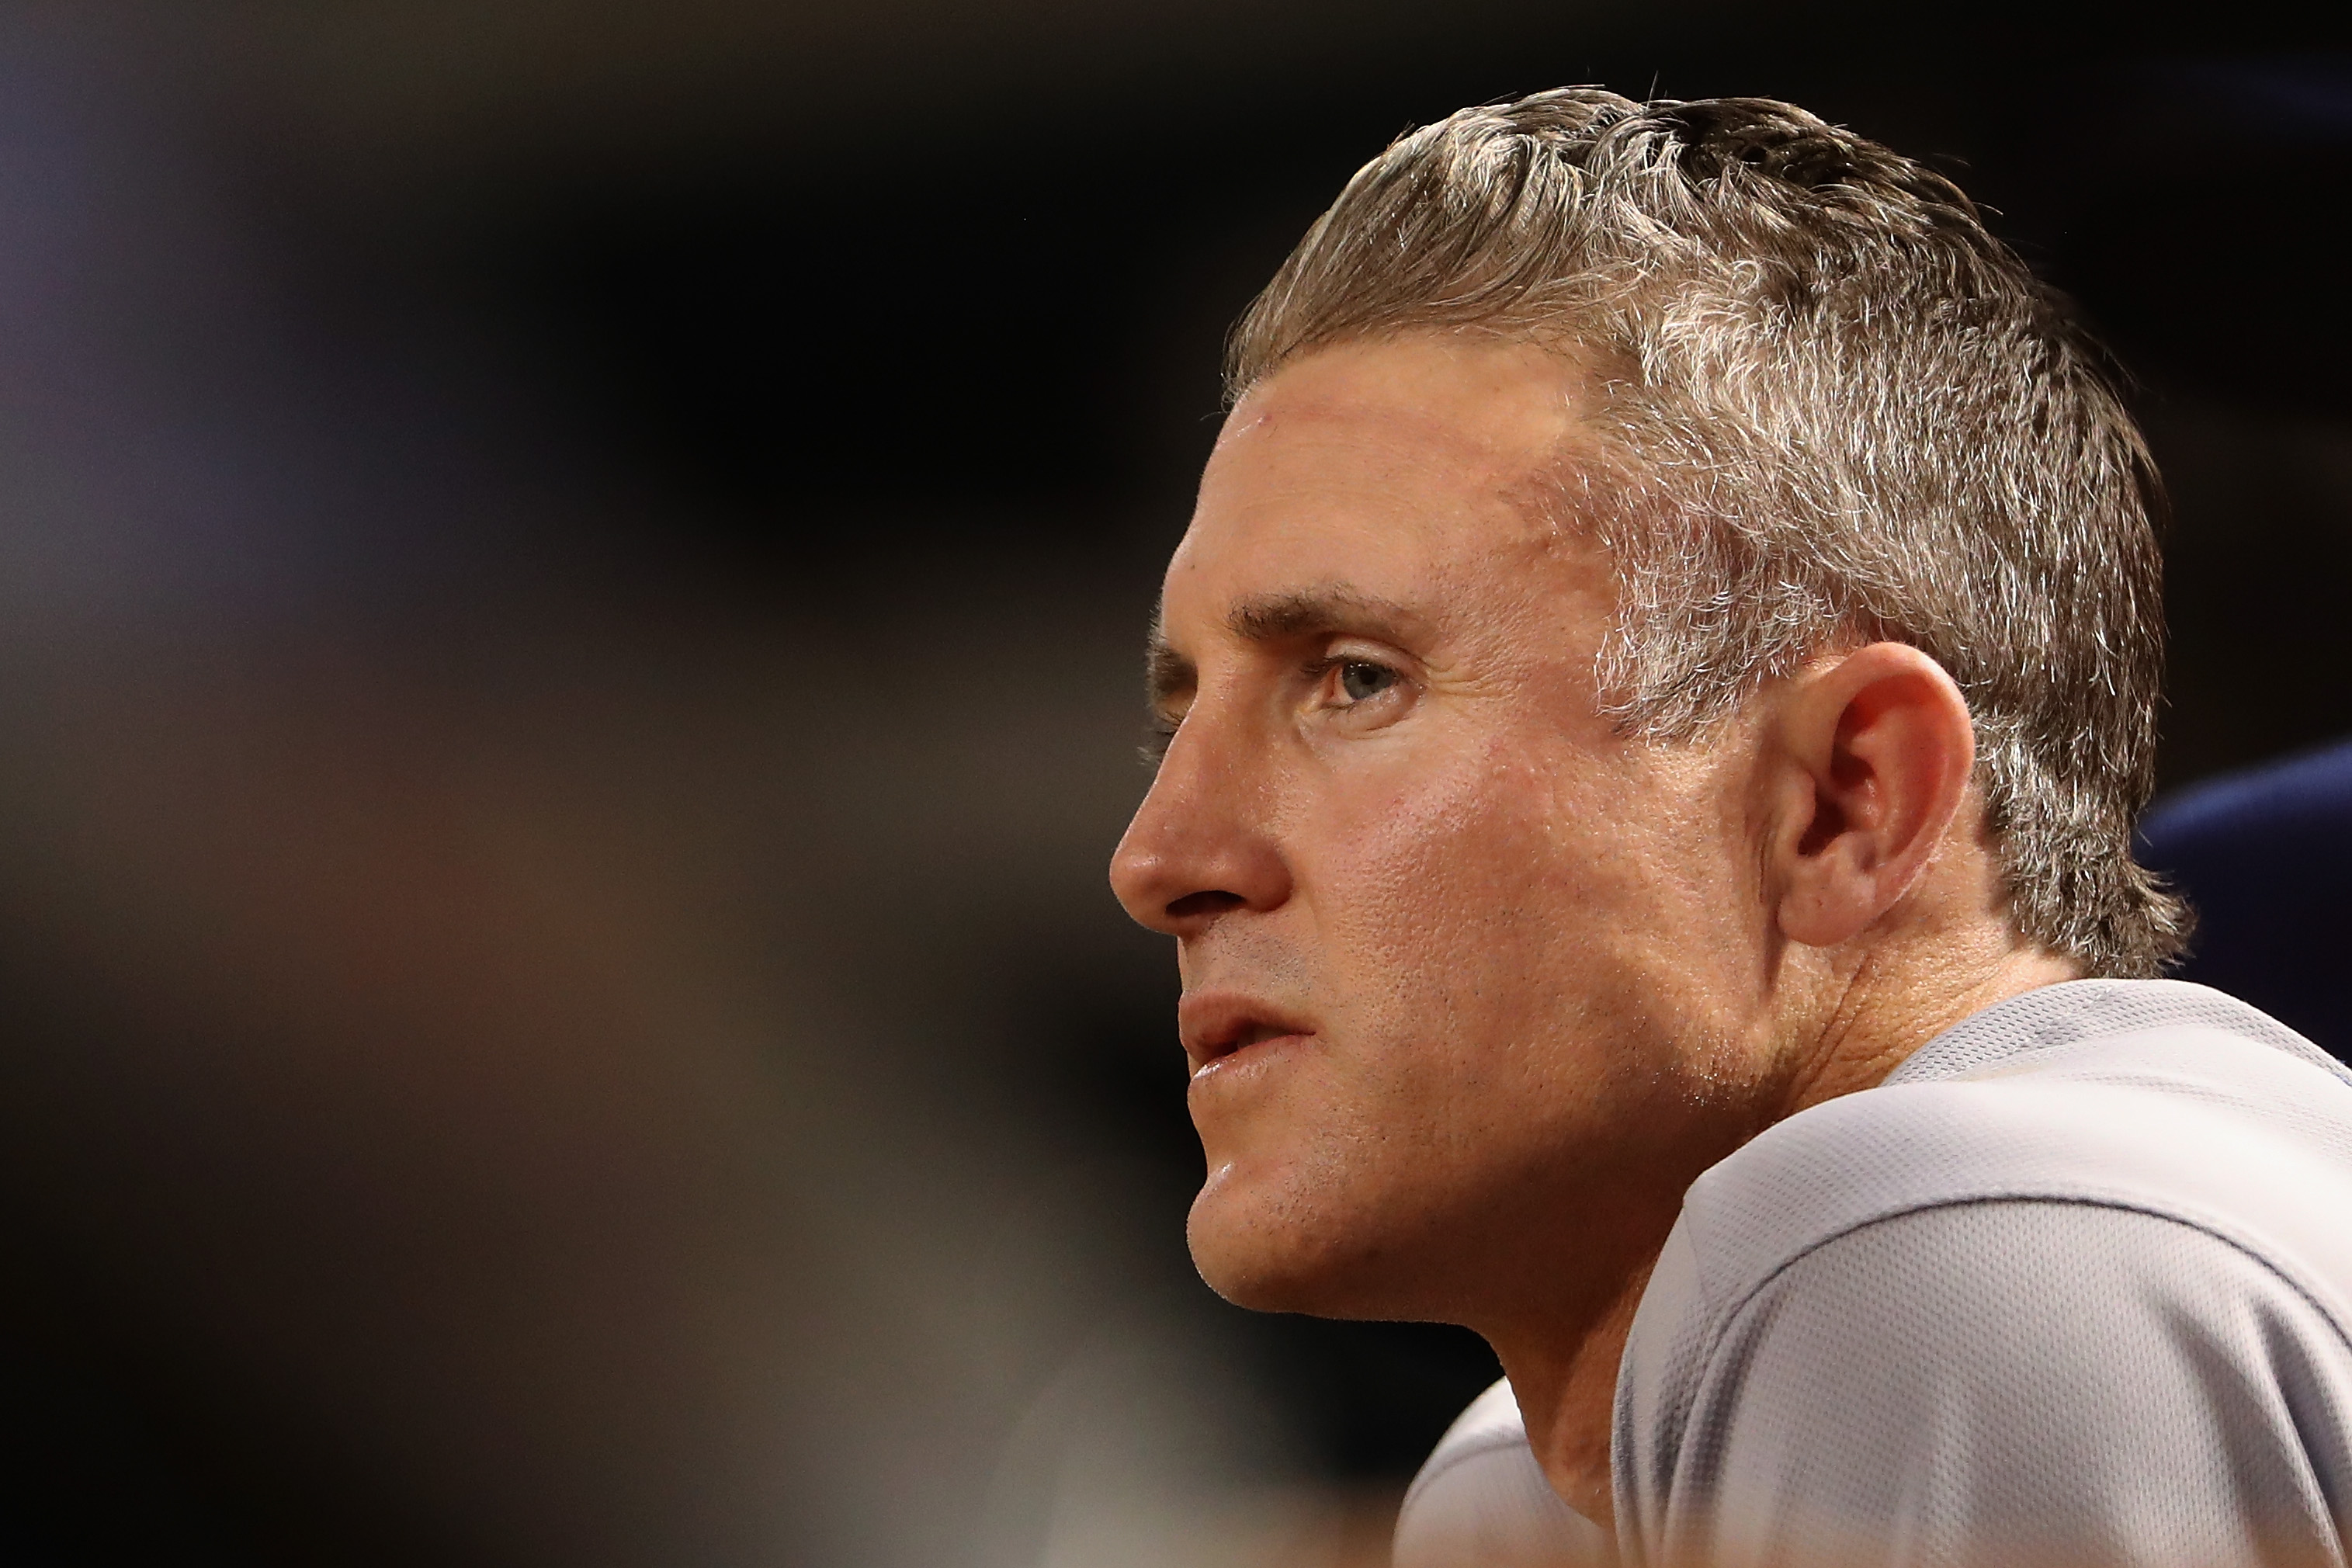 Dodgers: Making the case for Chase Utley in the Hall of Fame